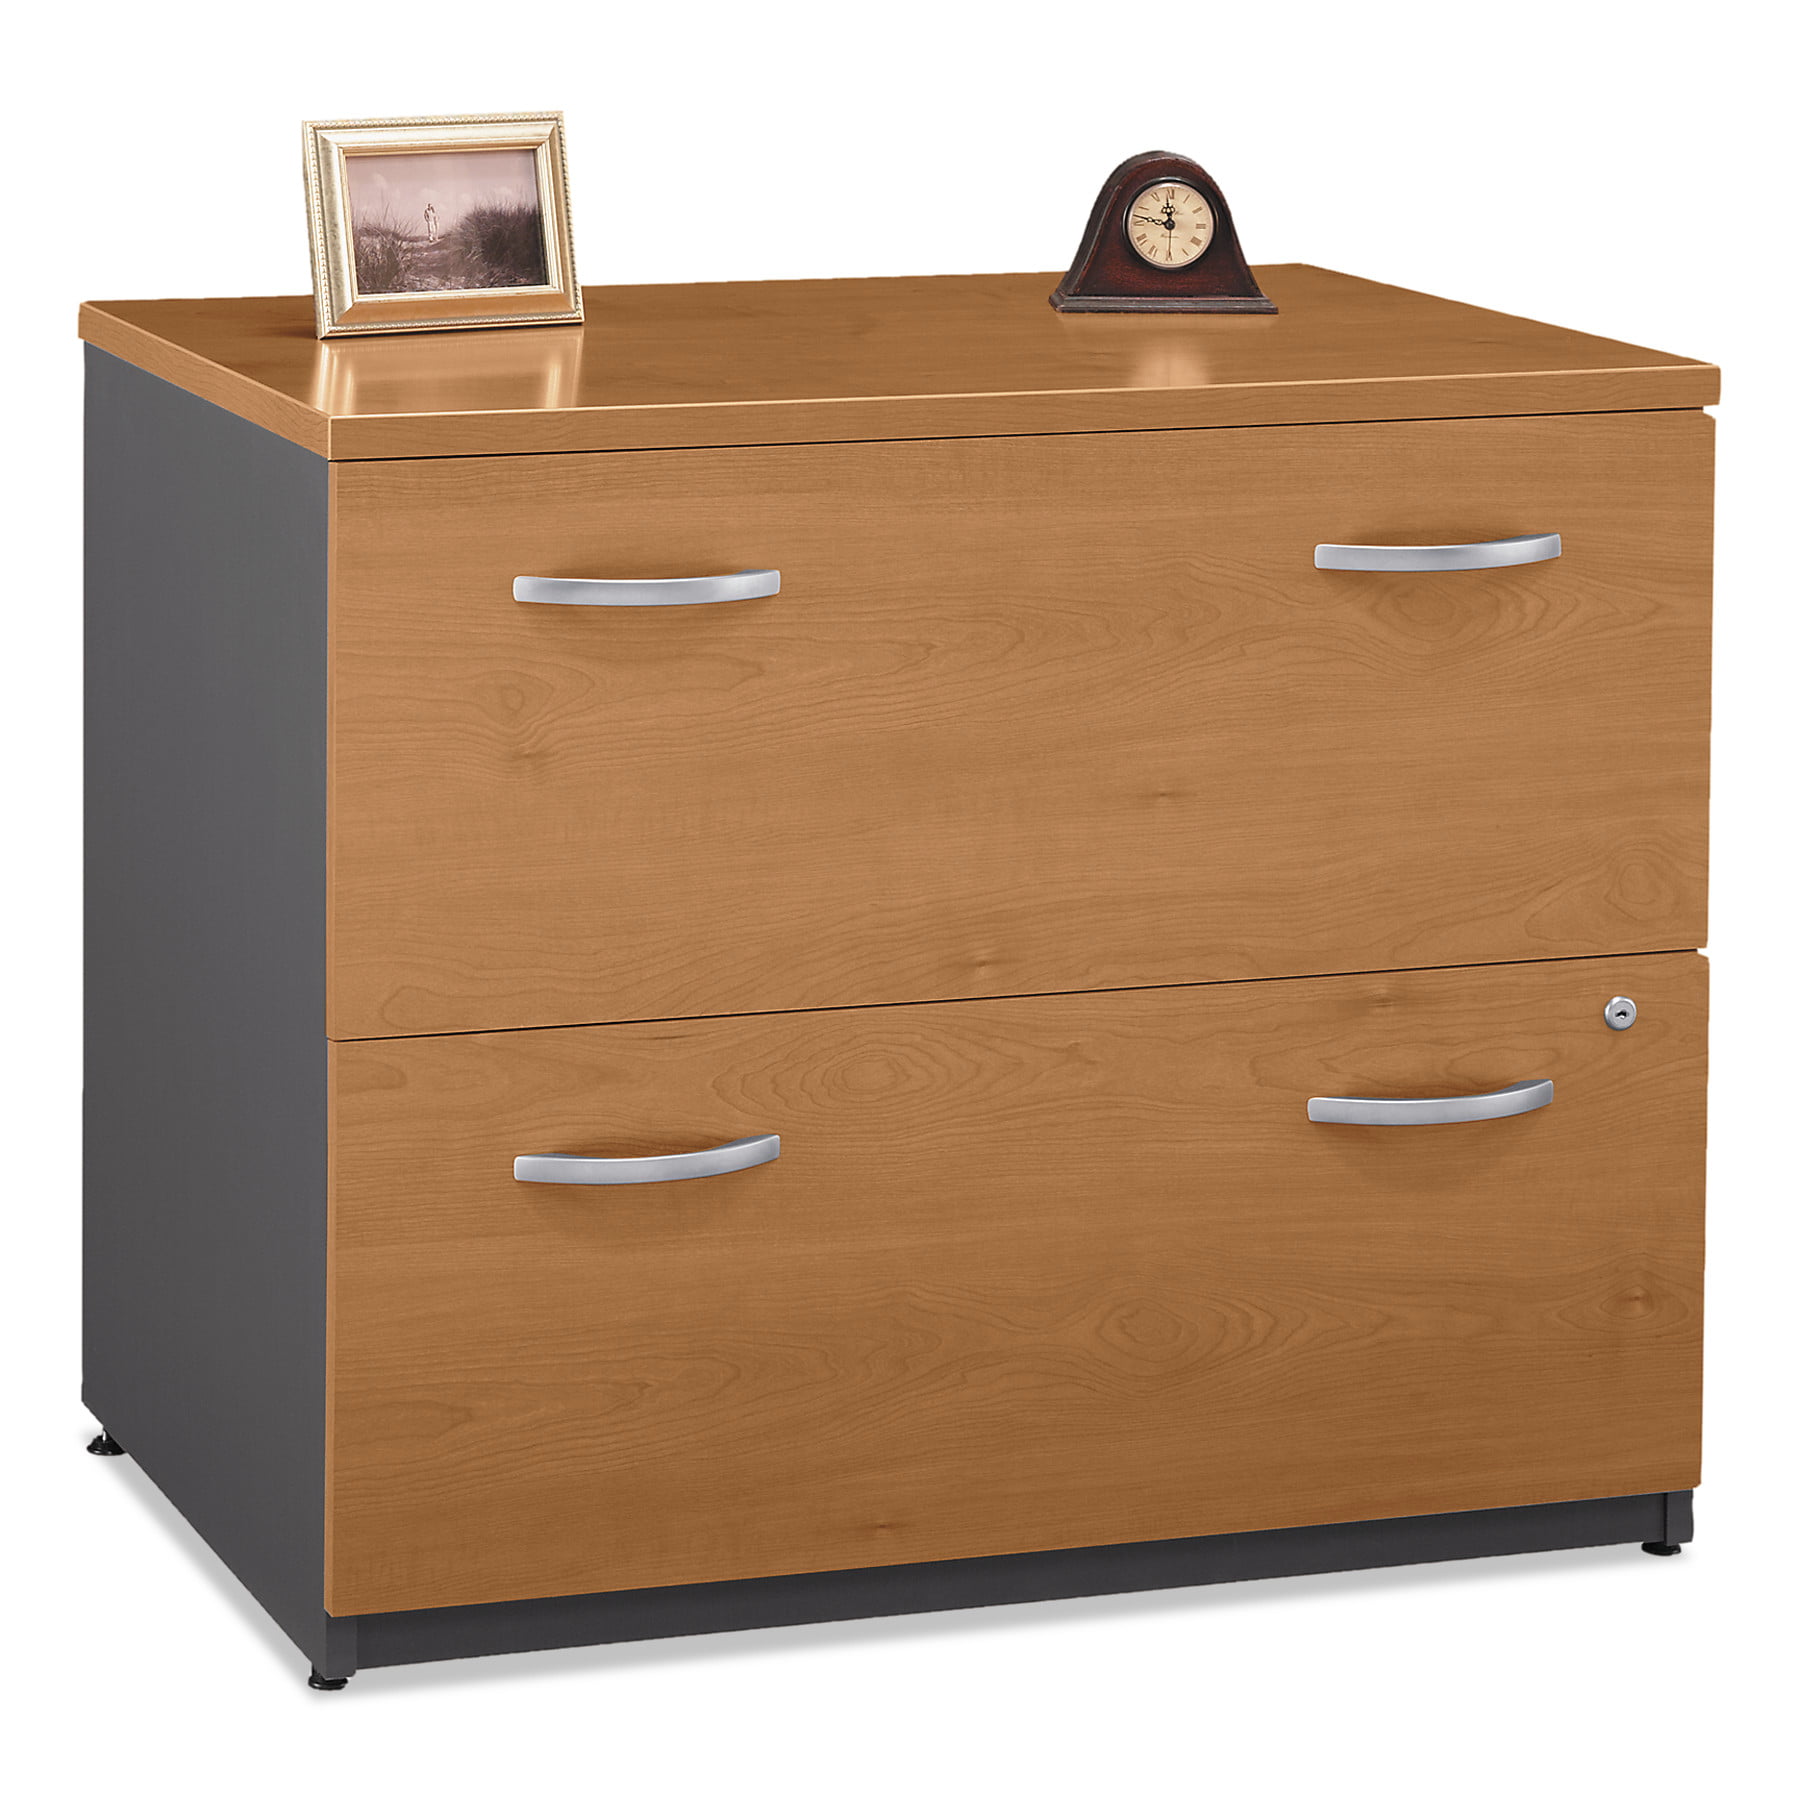 2 Drawers Lateral Lockable Filing Cabinet, Cherry ...